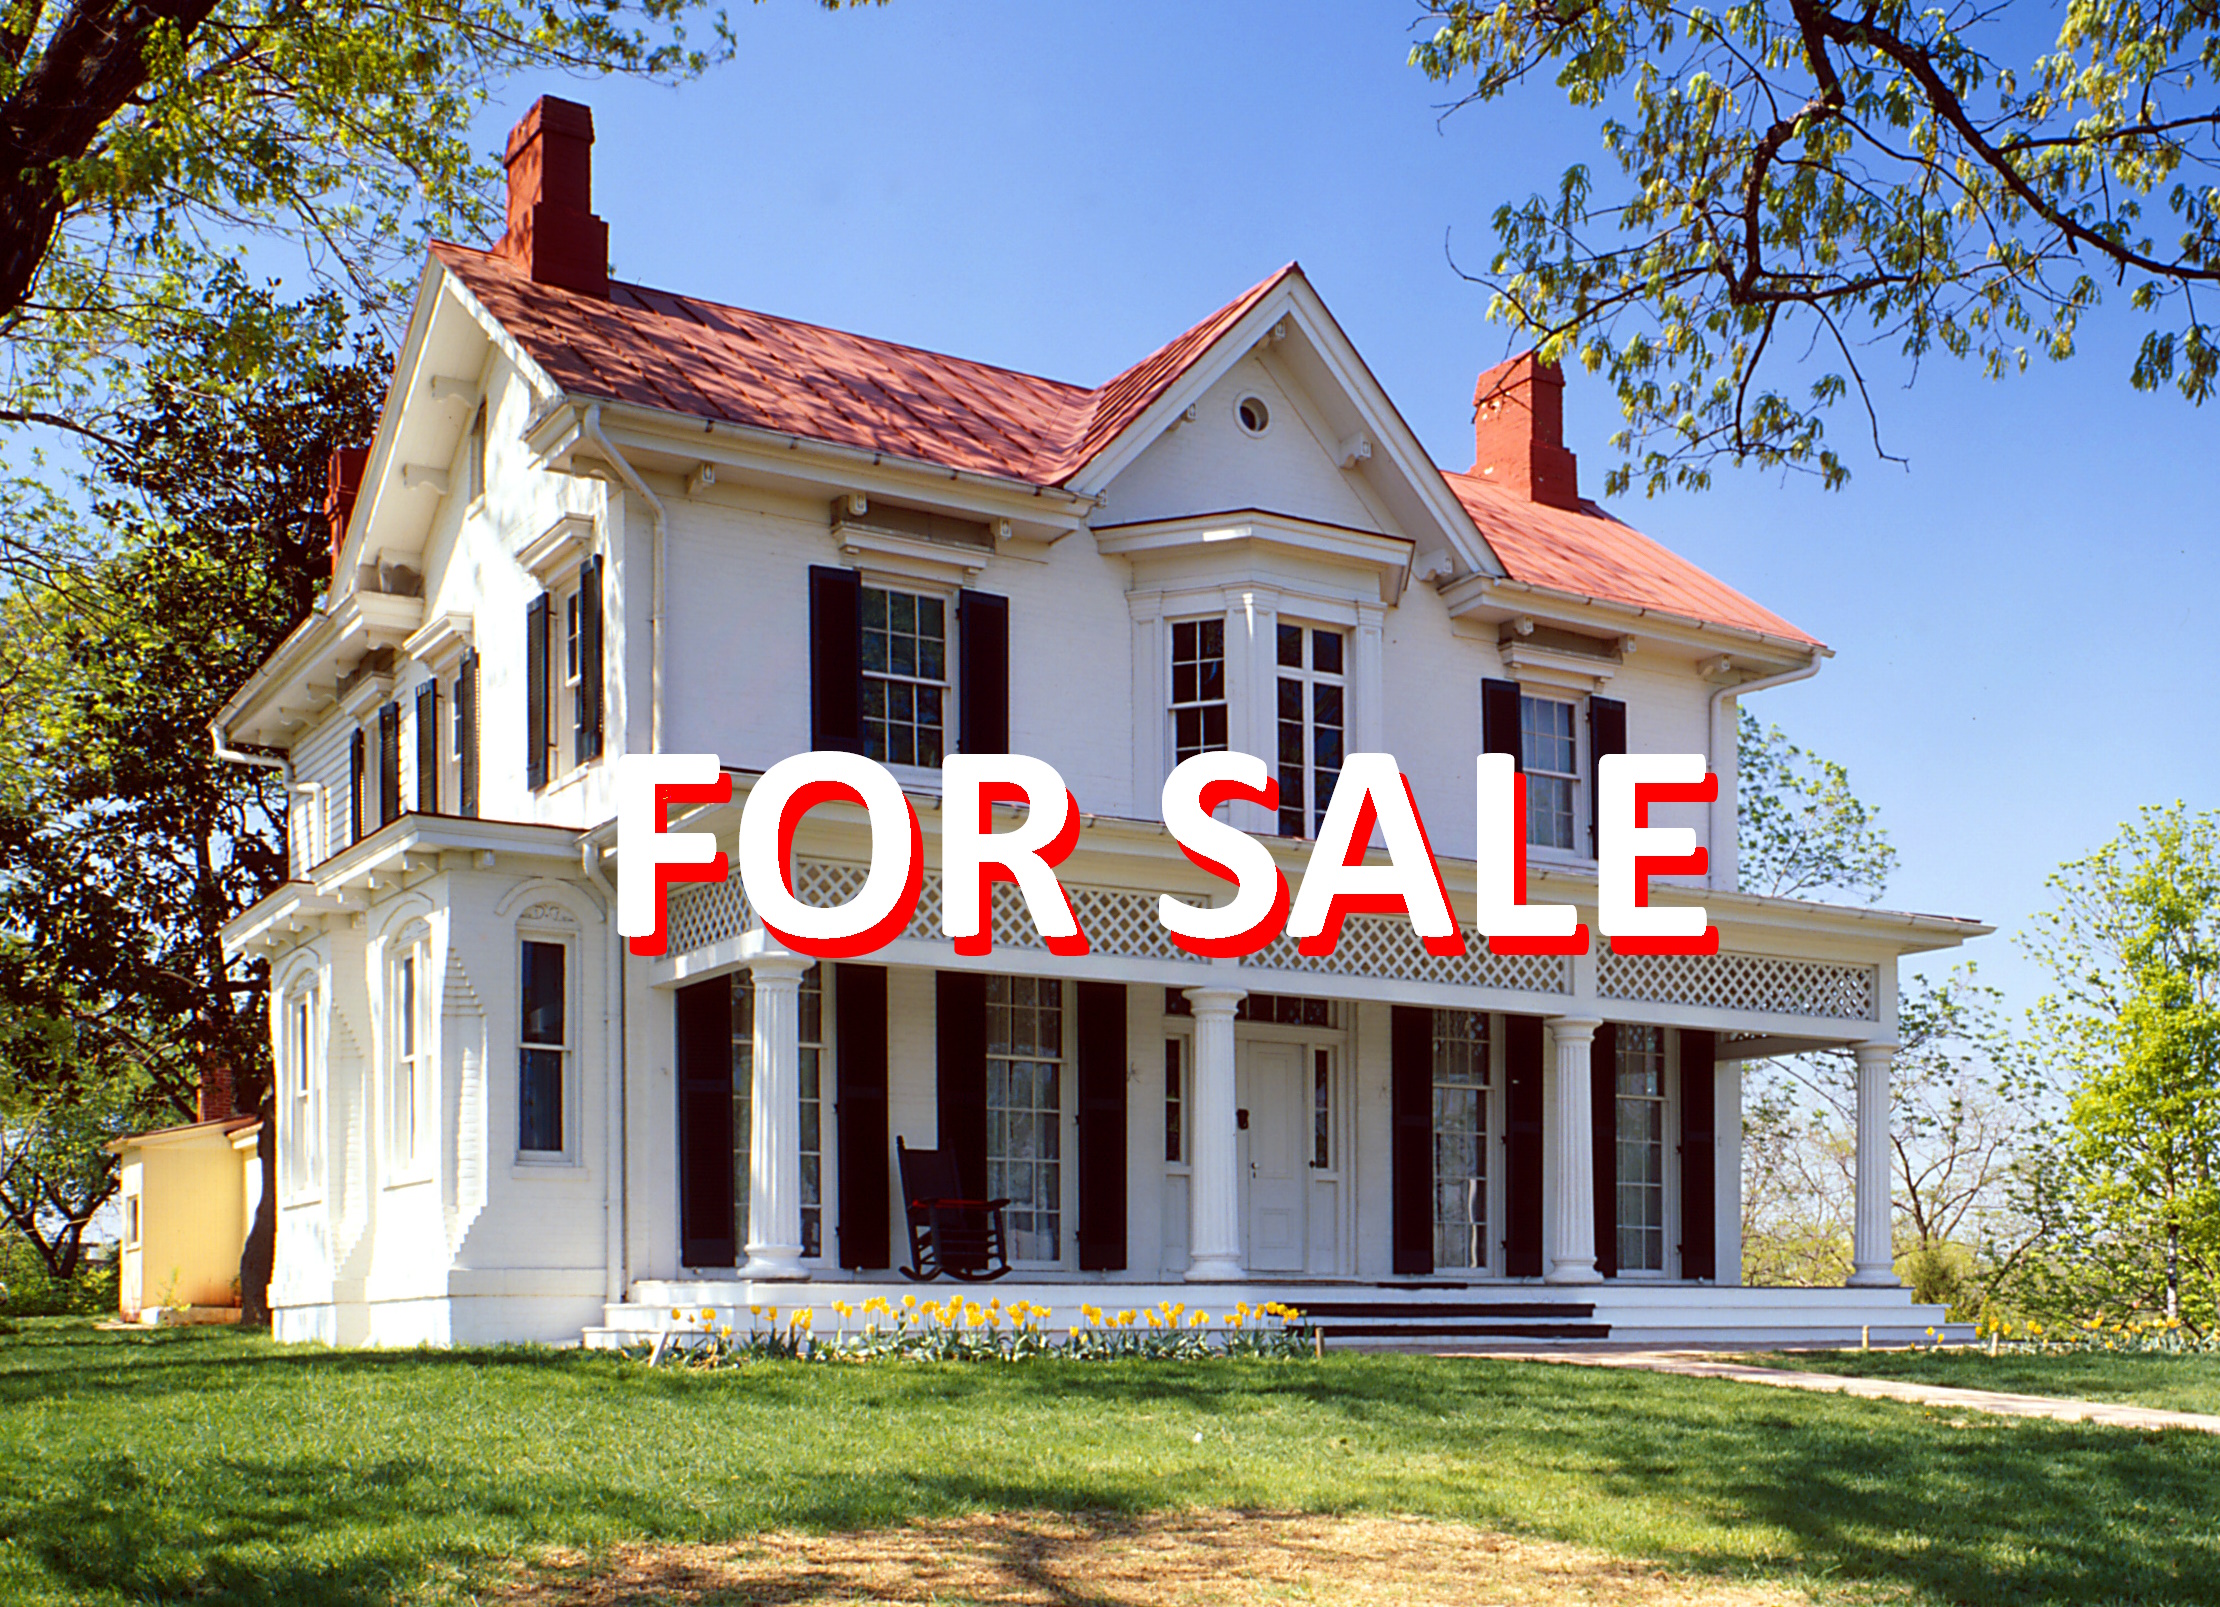 How Can You Sell an Inherited House in Tennessee